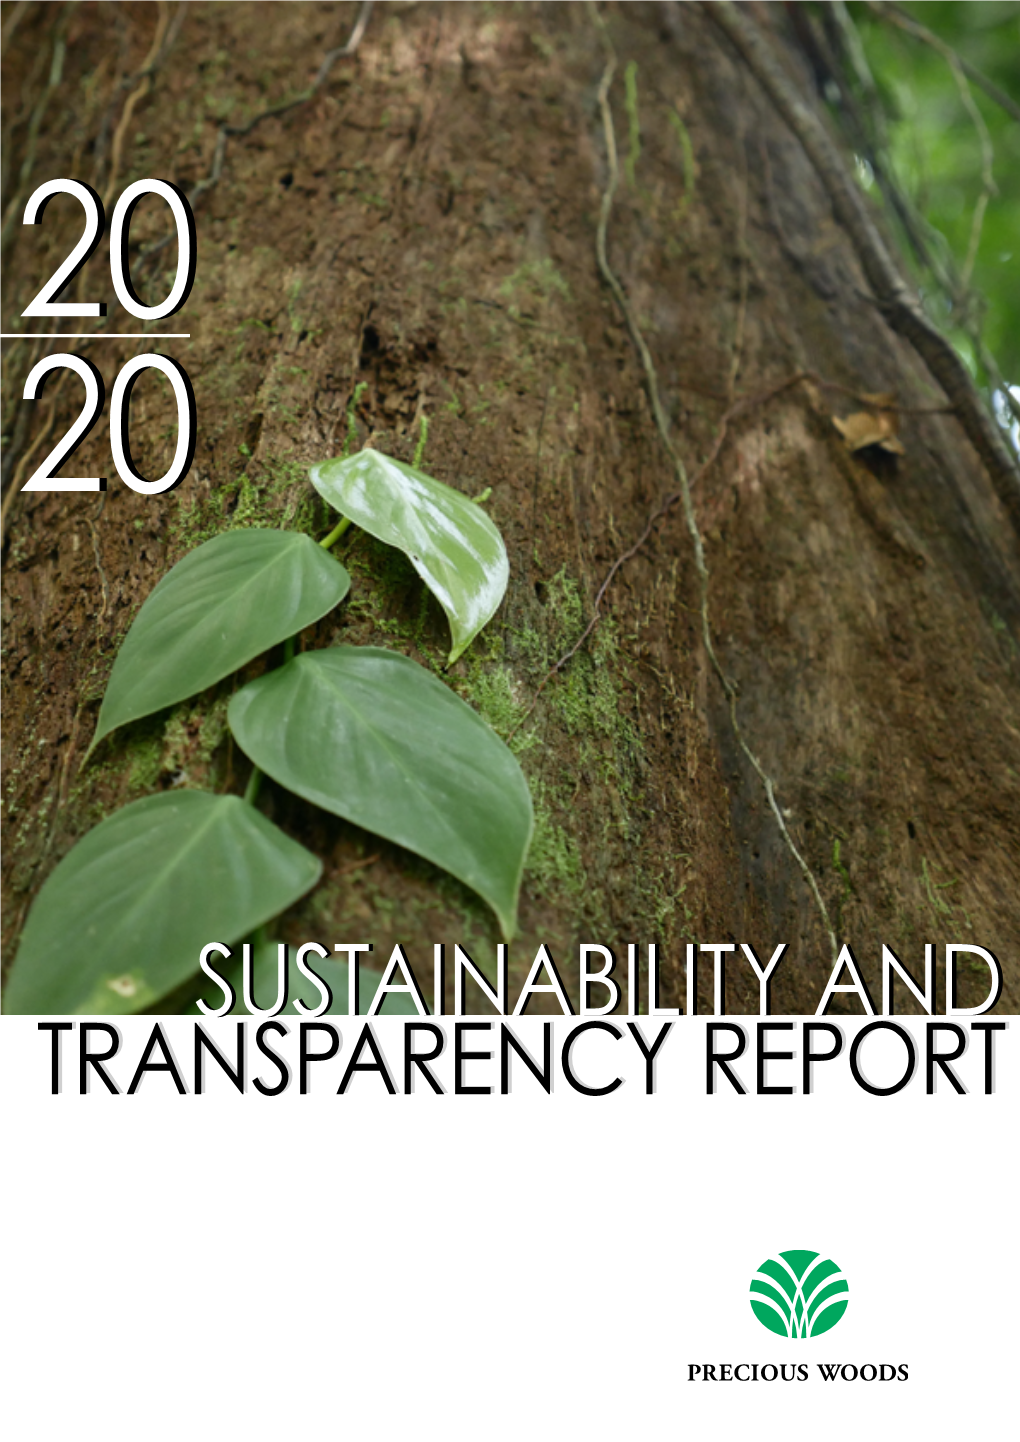 2020 Sustainability and Transparency Report